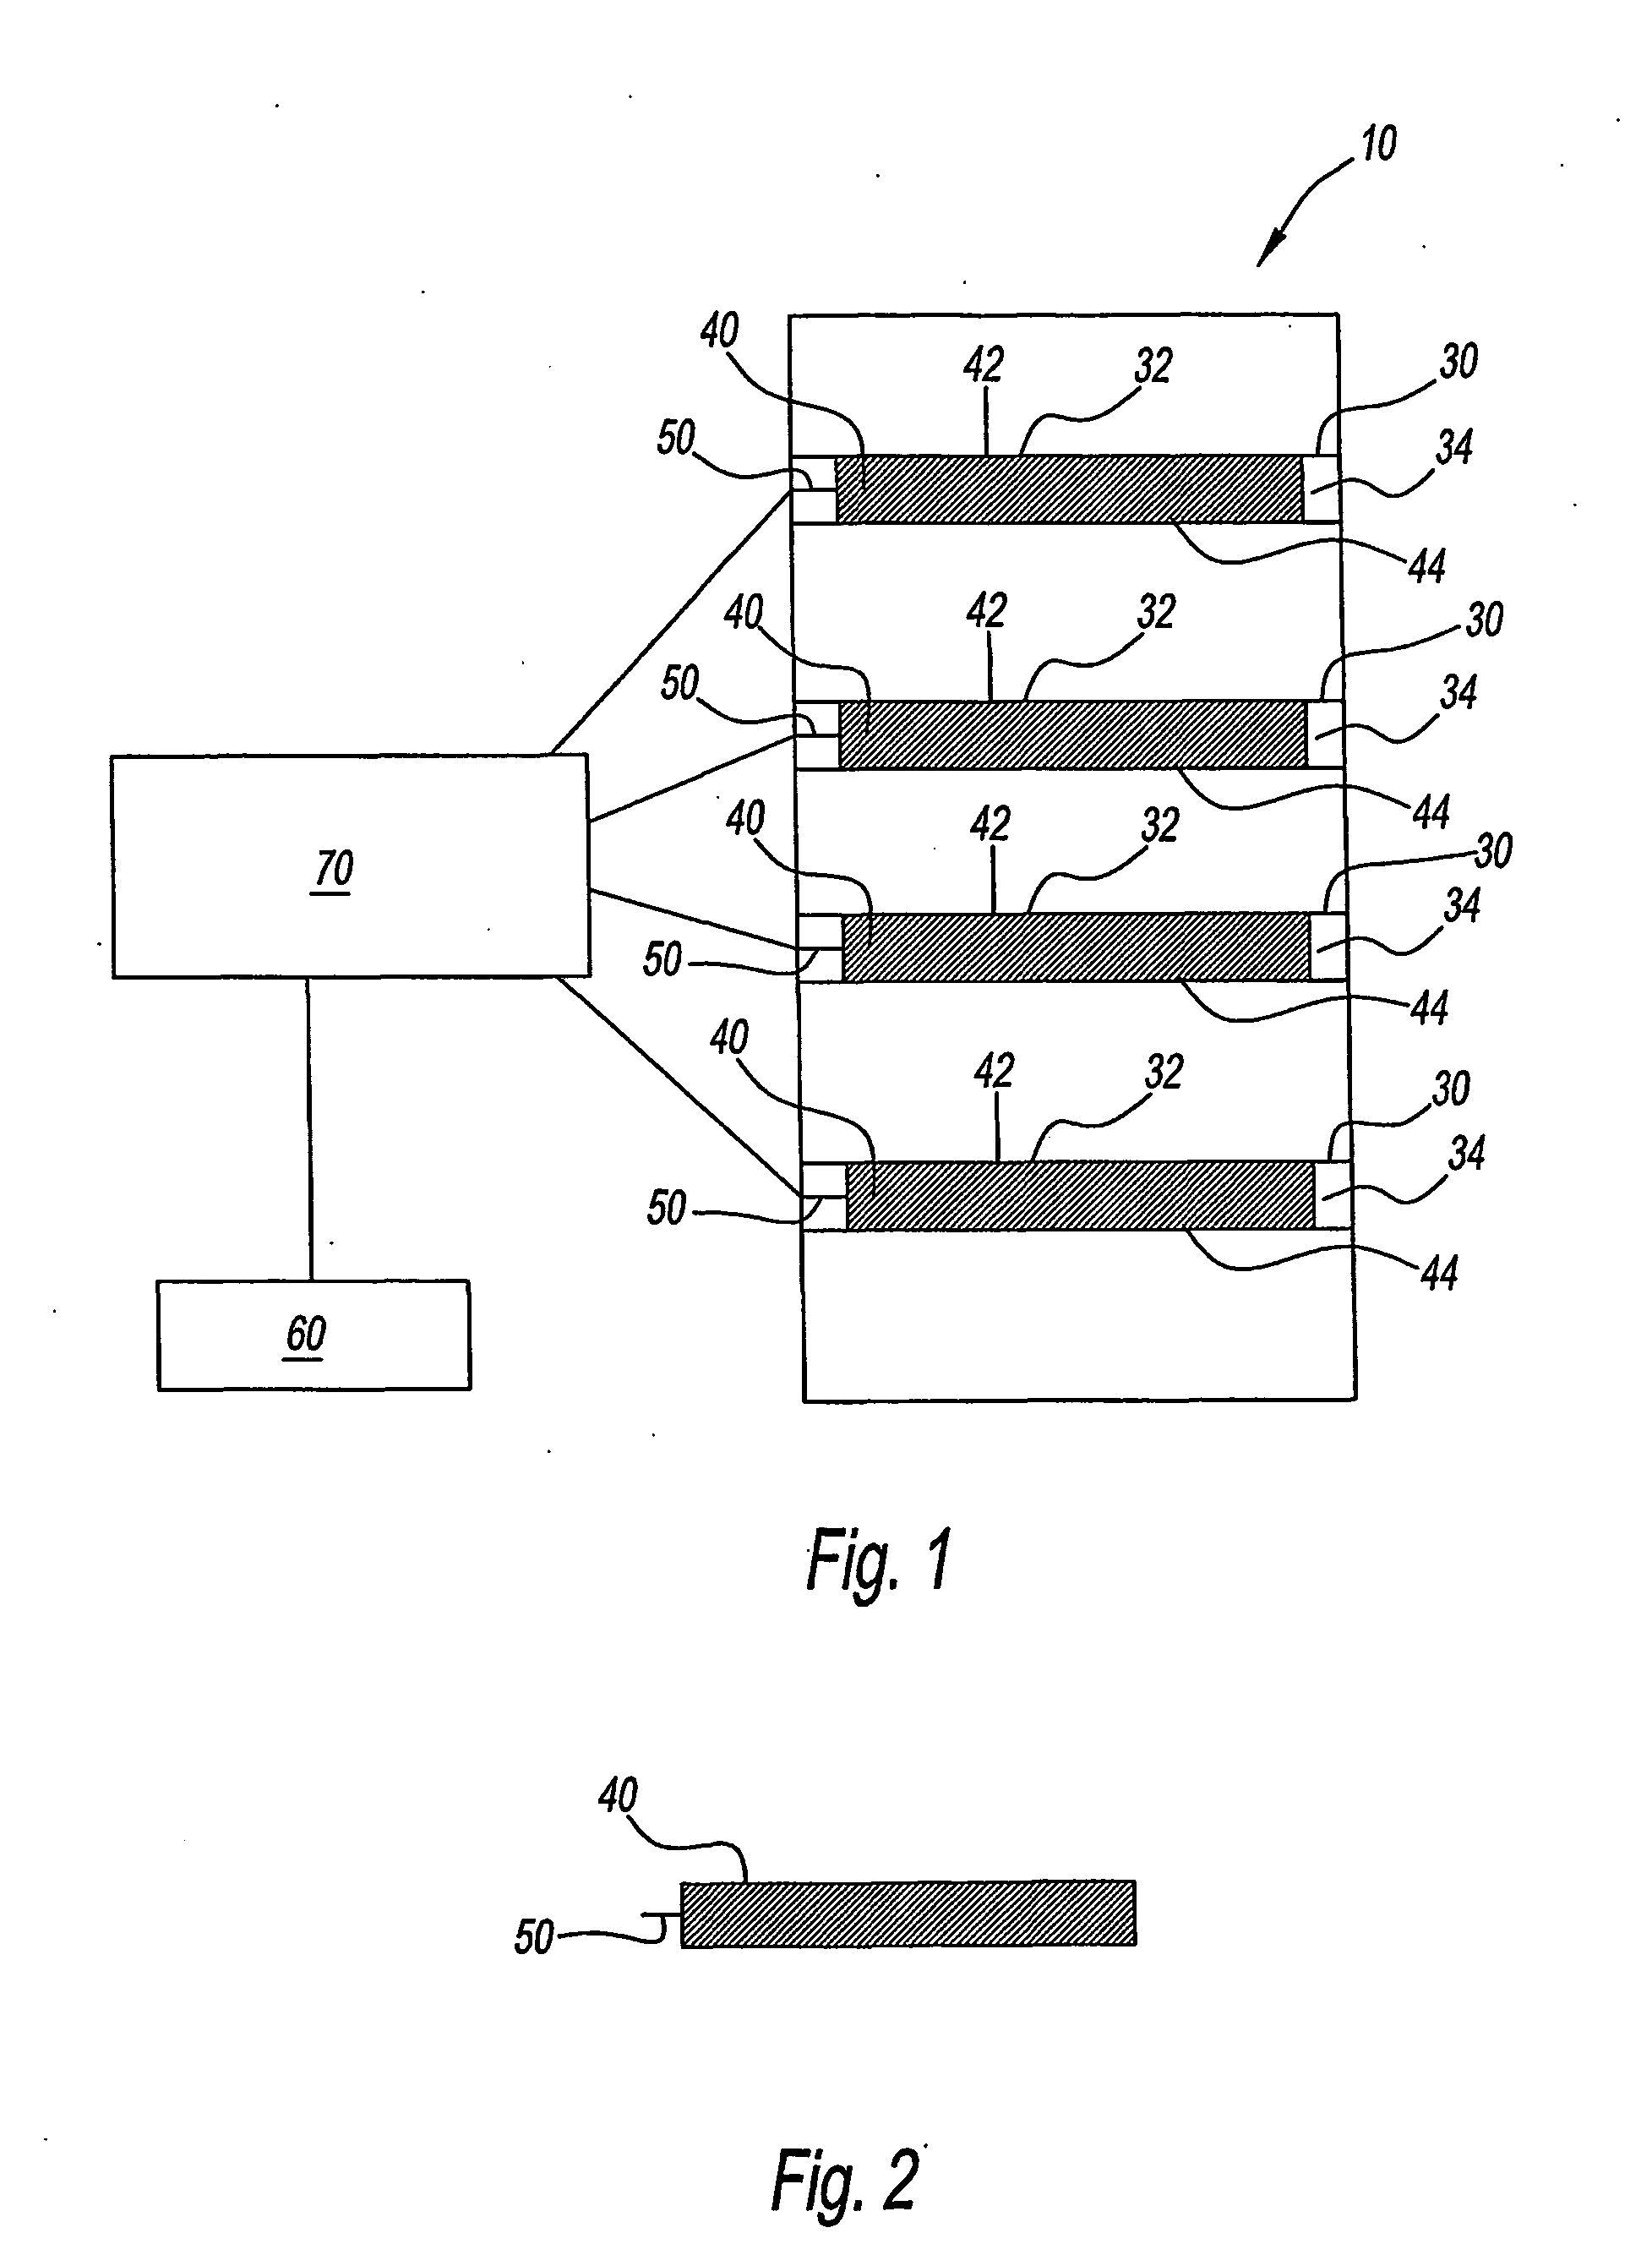 Thermoelectric Device Based Mobile Freezer/Heater